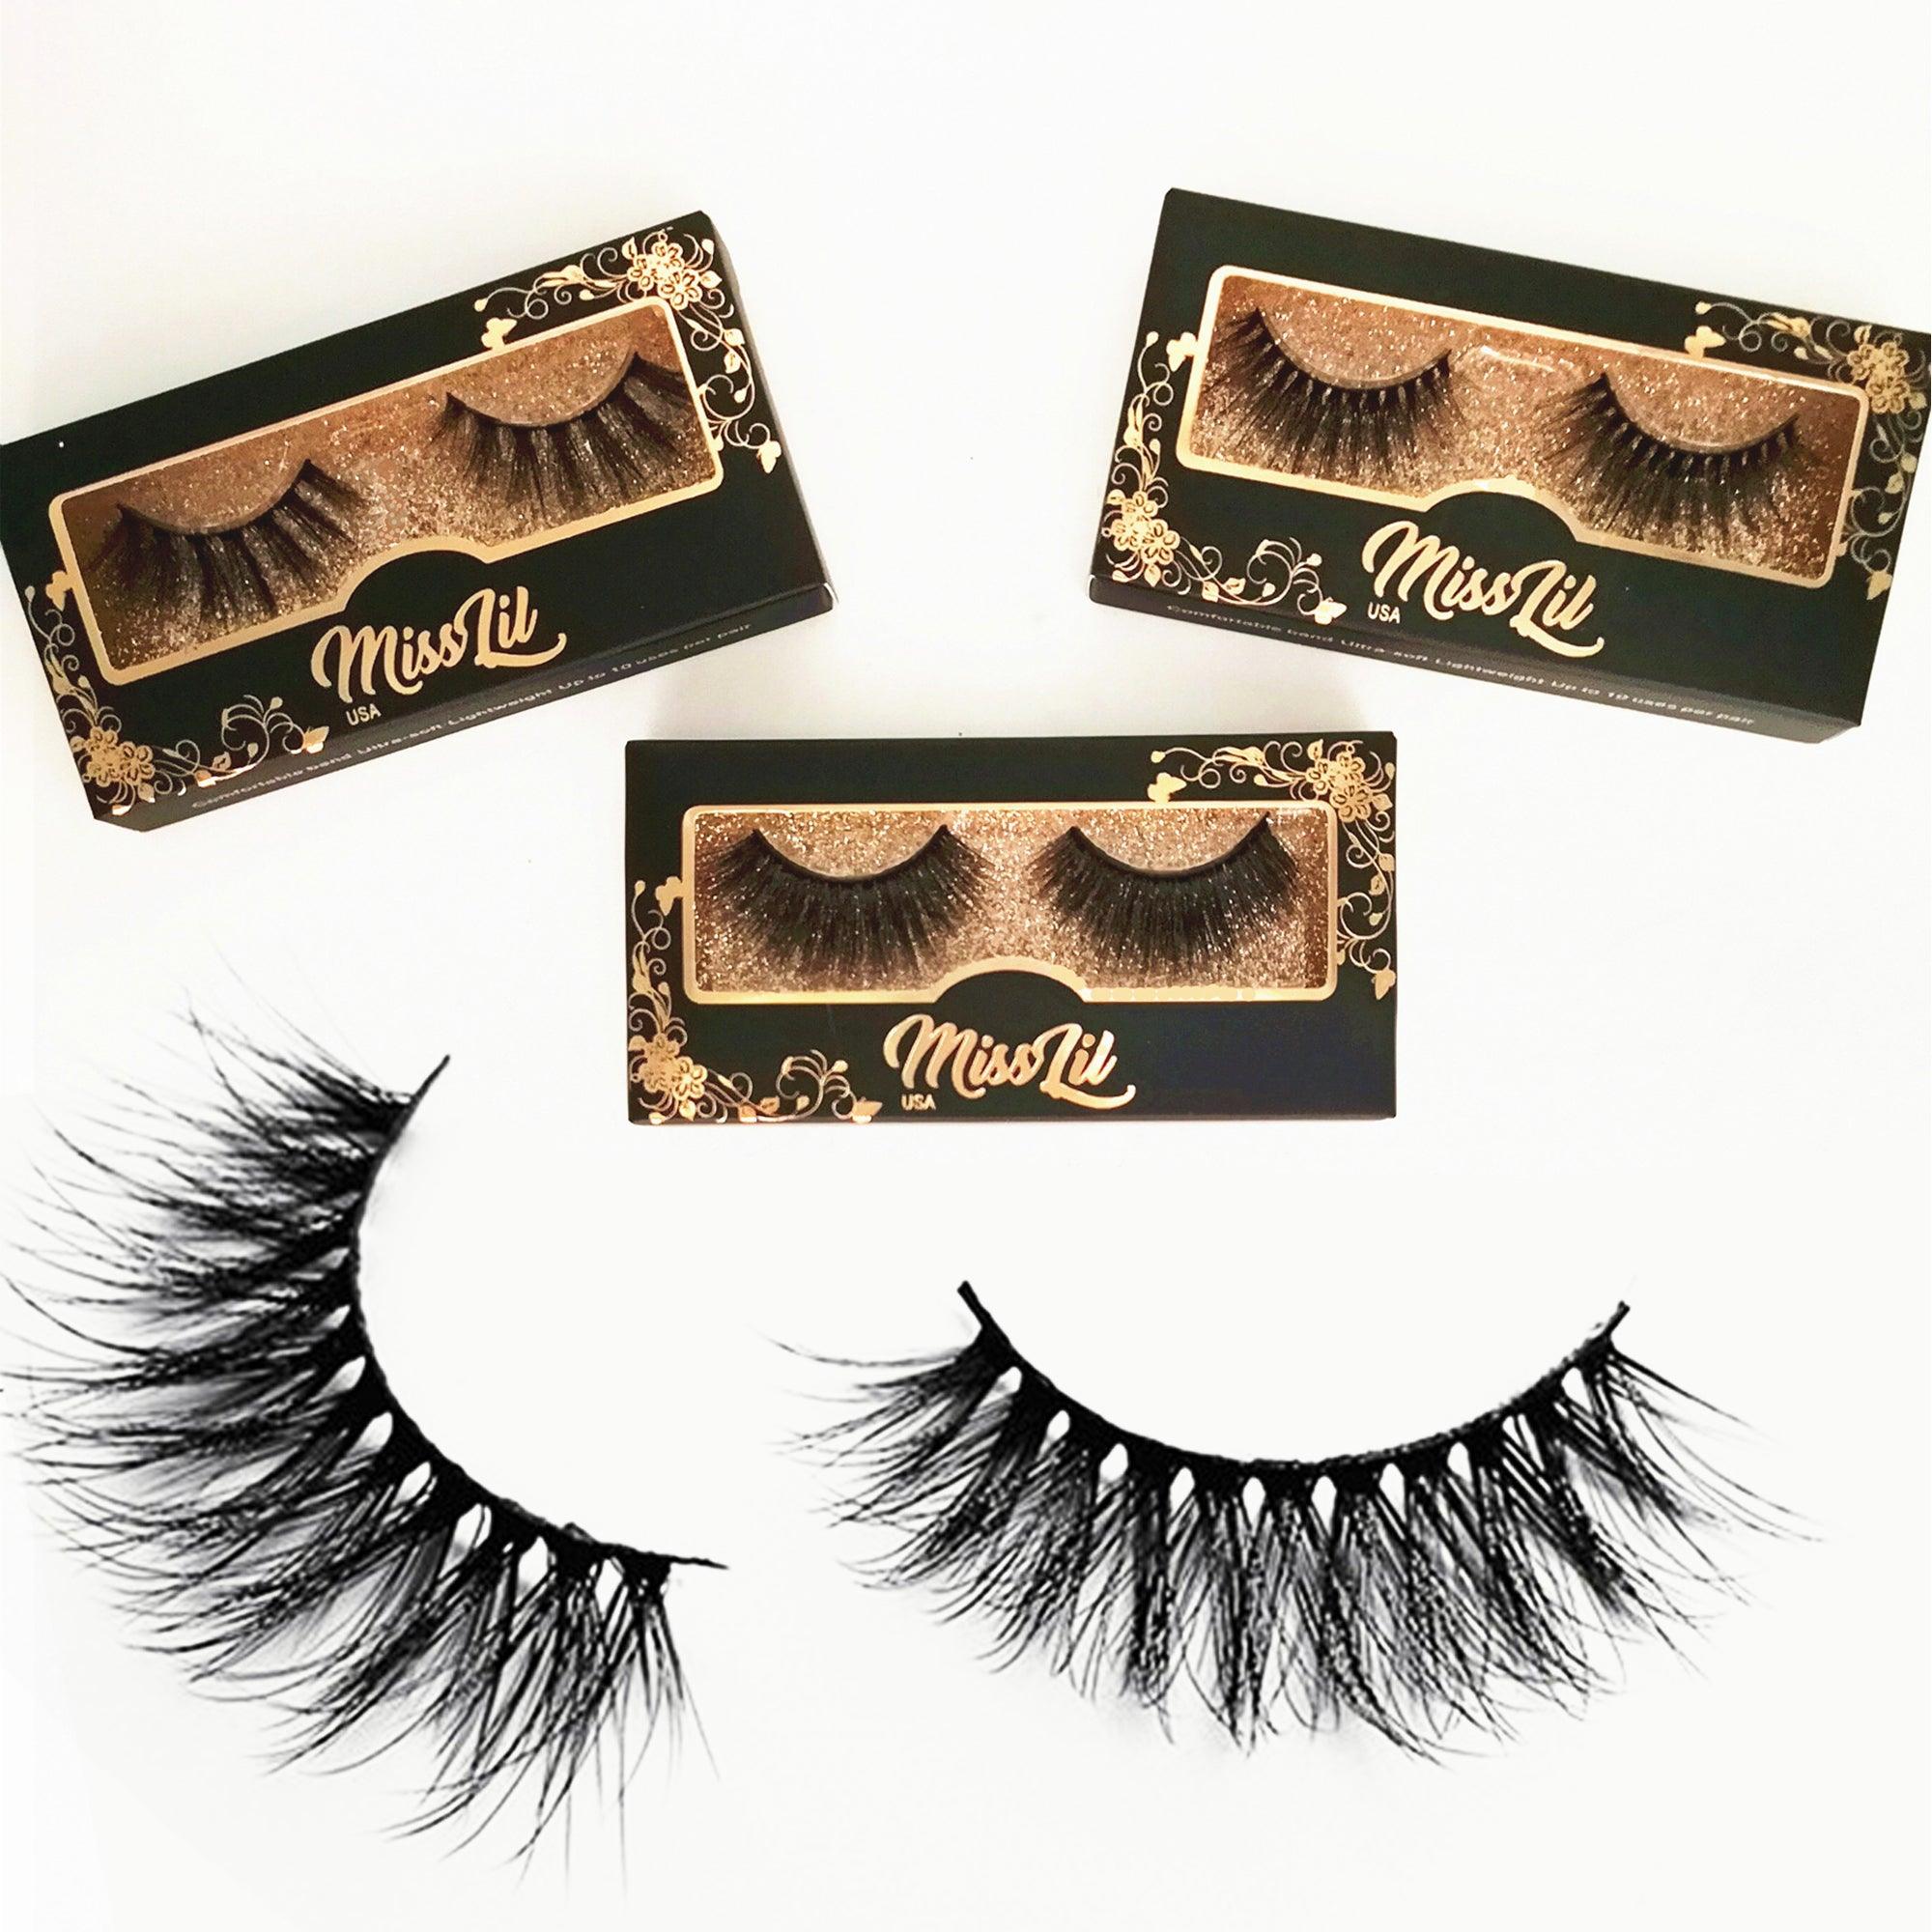 1-Pair Miss Lil USA Lashes #37 (Pack of 12) - Miss Lil USA Wholesale